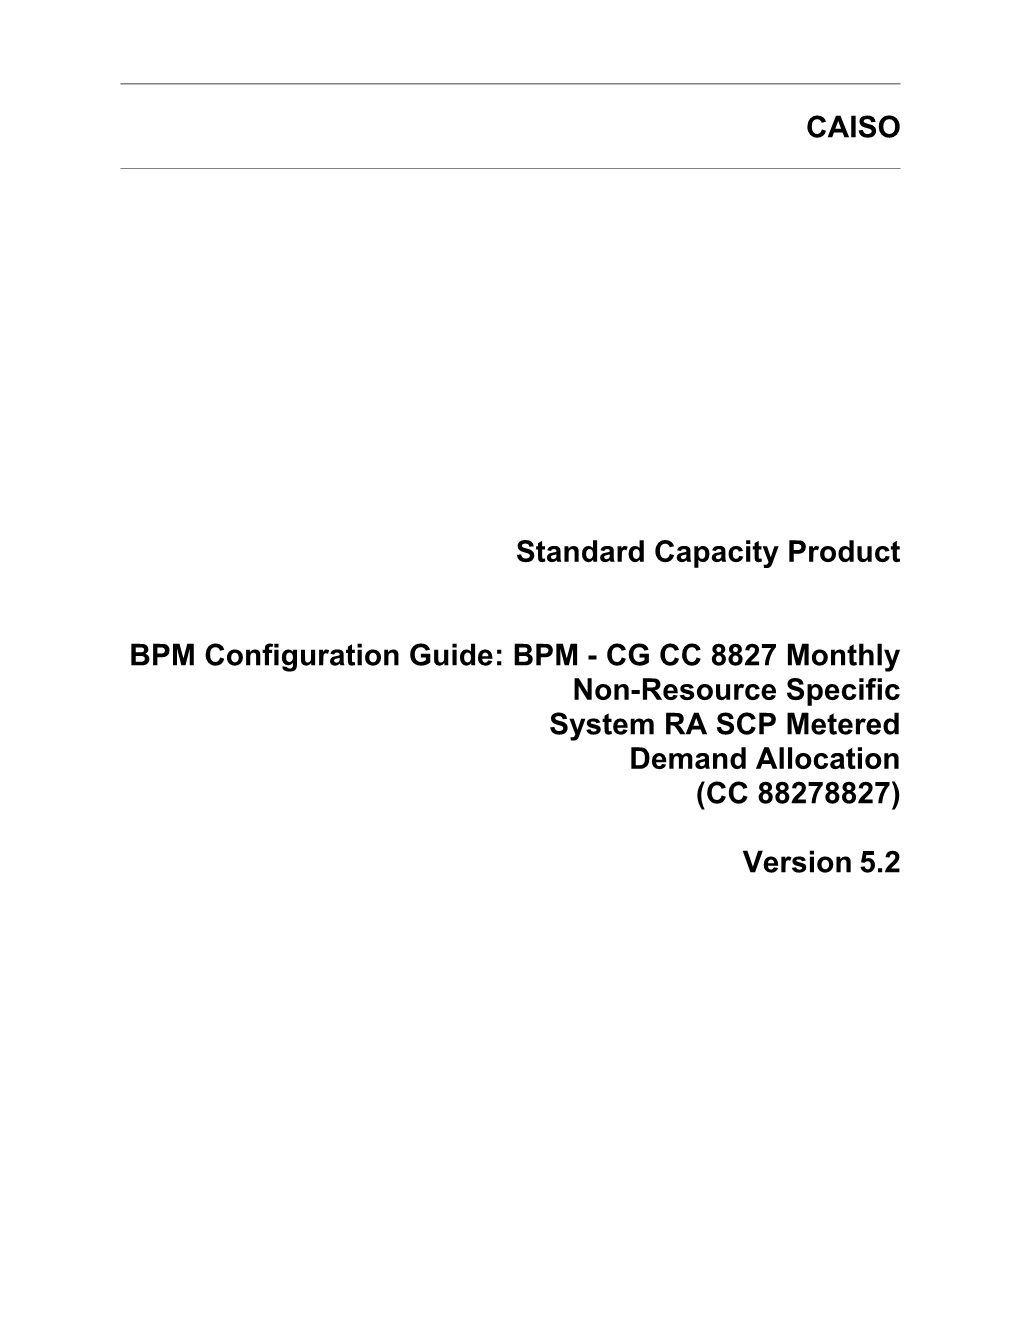 BPM - CG CC 8827 Monthly Non-Resource Specific System RA SCP Metered Demand Allocation